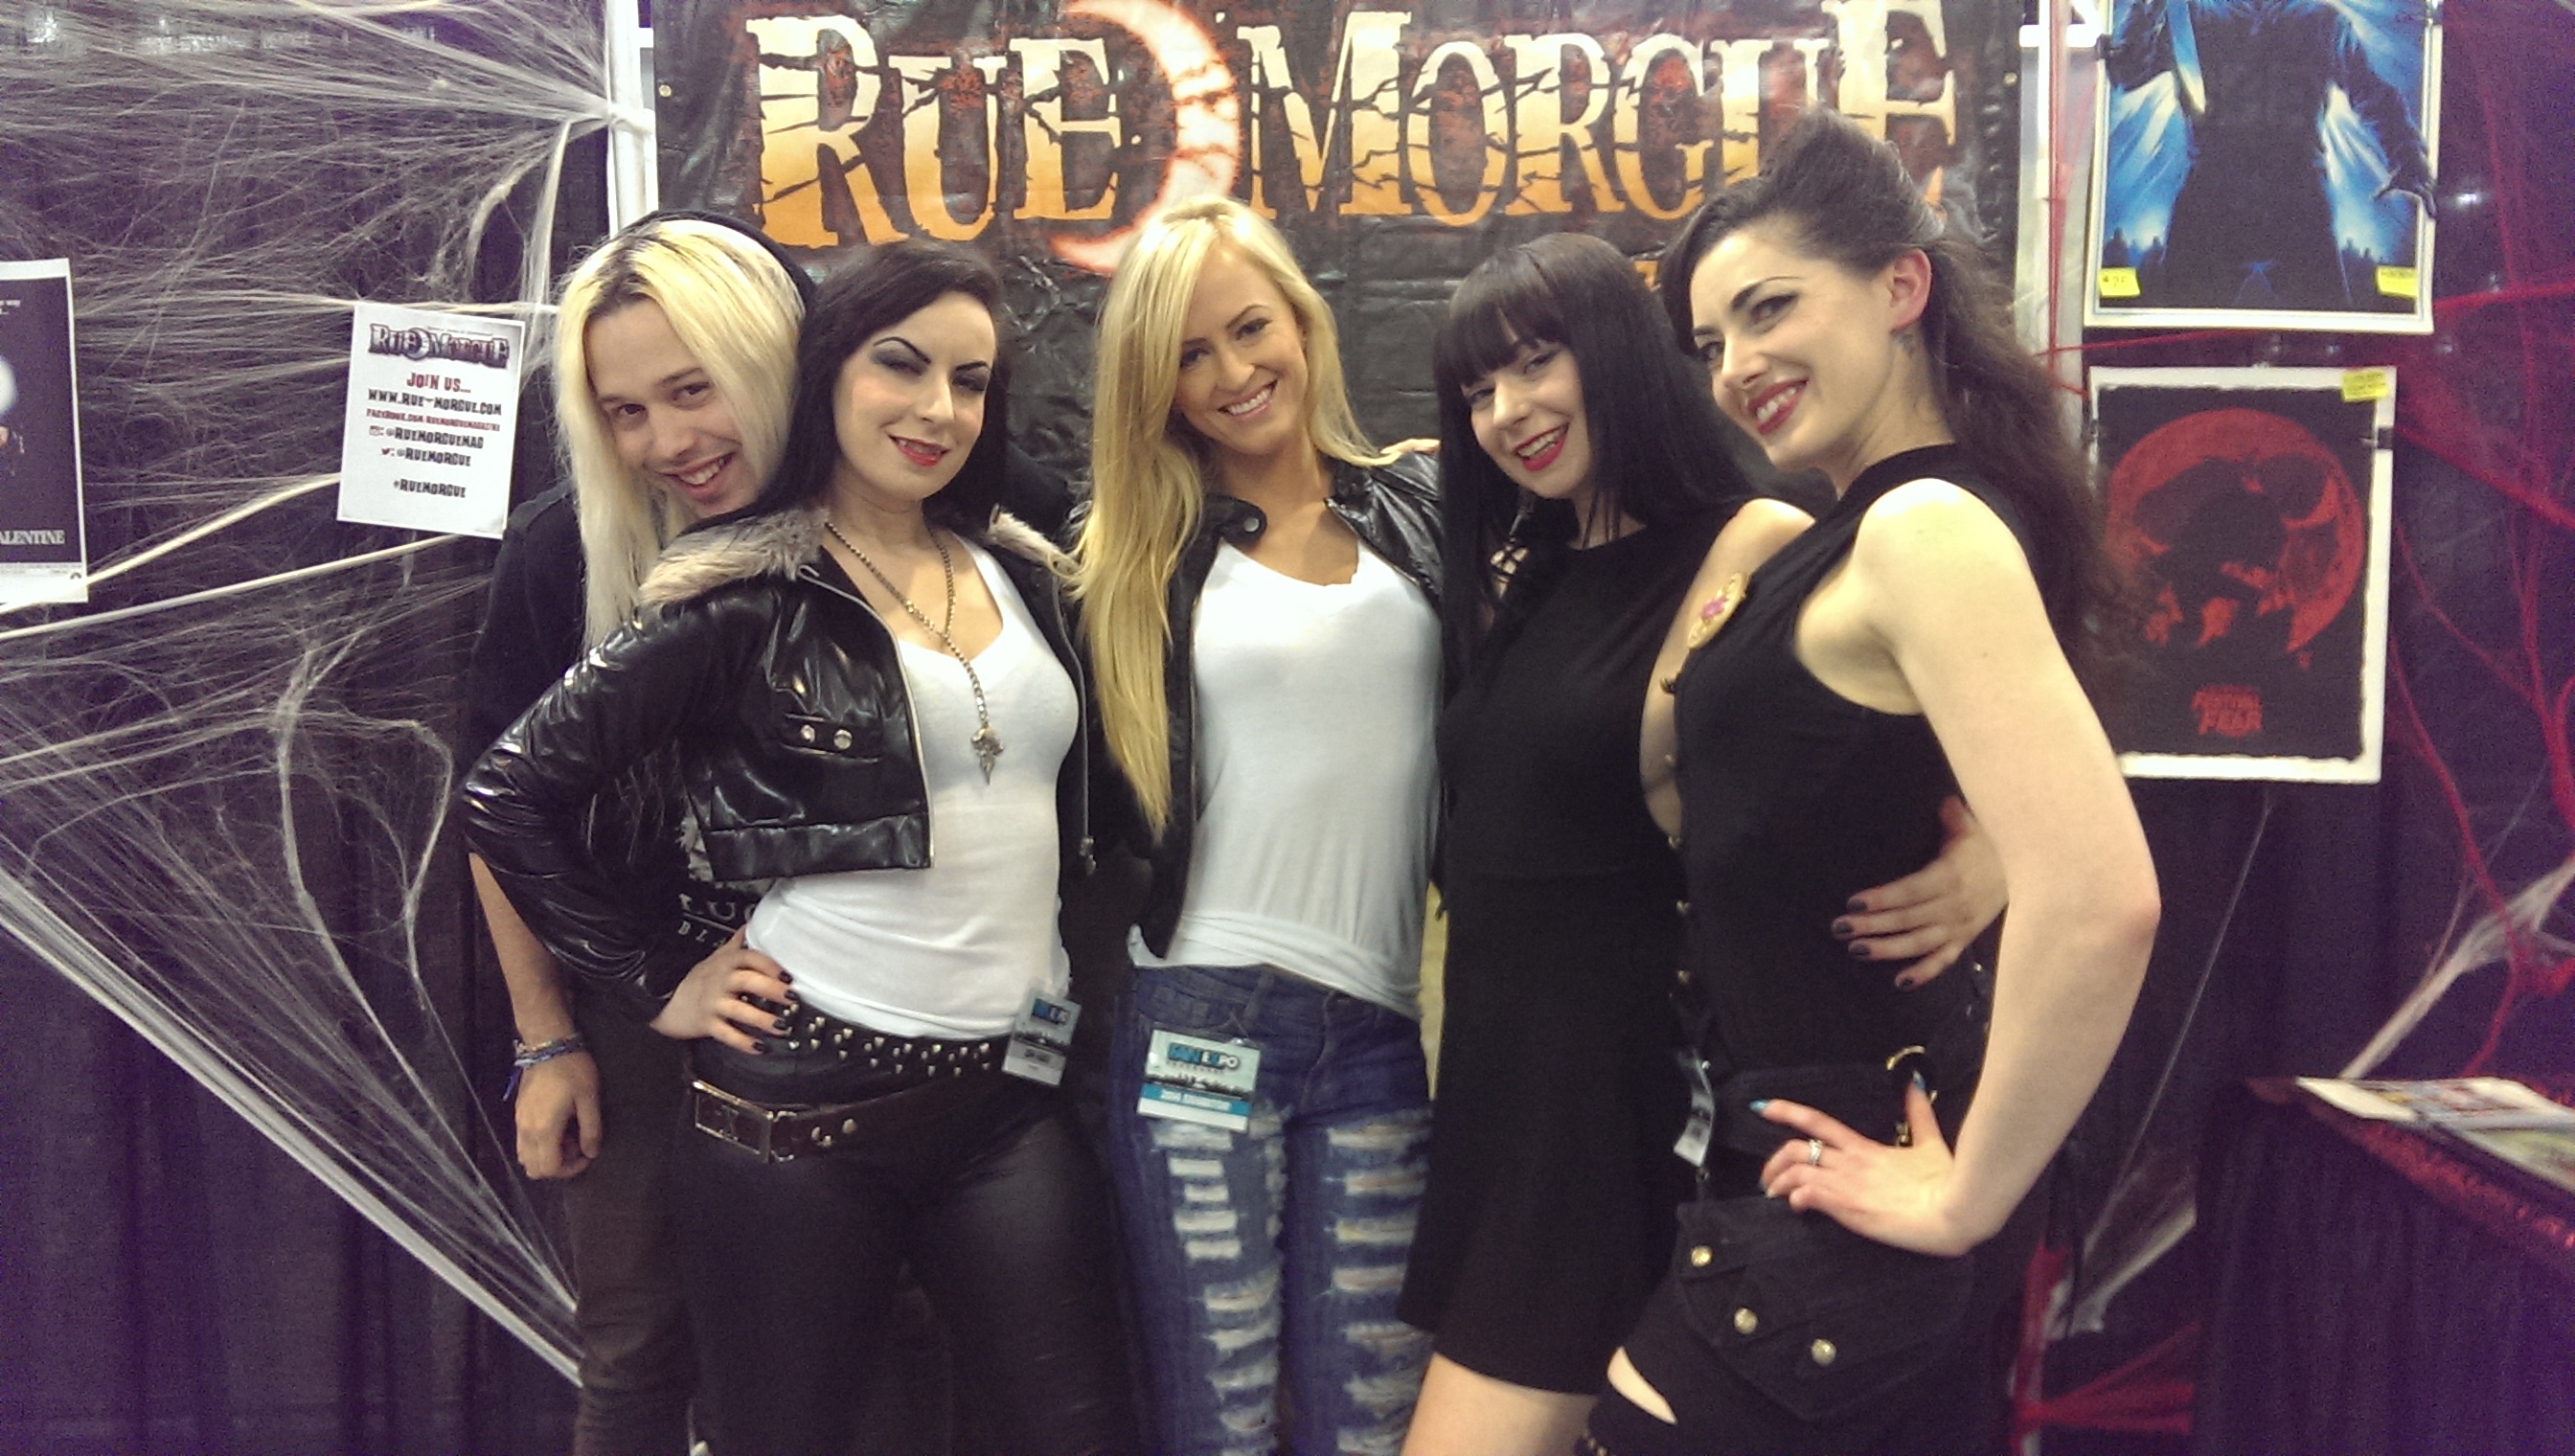 (From right to left) Kevvy Mental, Jen Soska, Summer Rae, Sylvia Soska, and Tristan Risk at the Rue Morgue Festival of Fear convention in Vancouver.